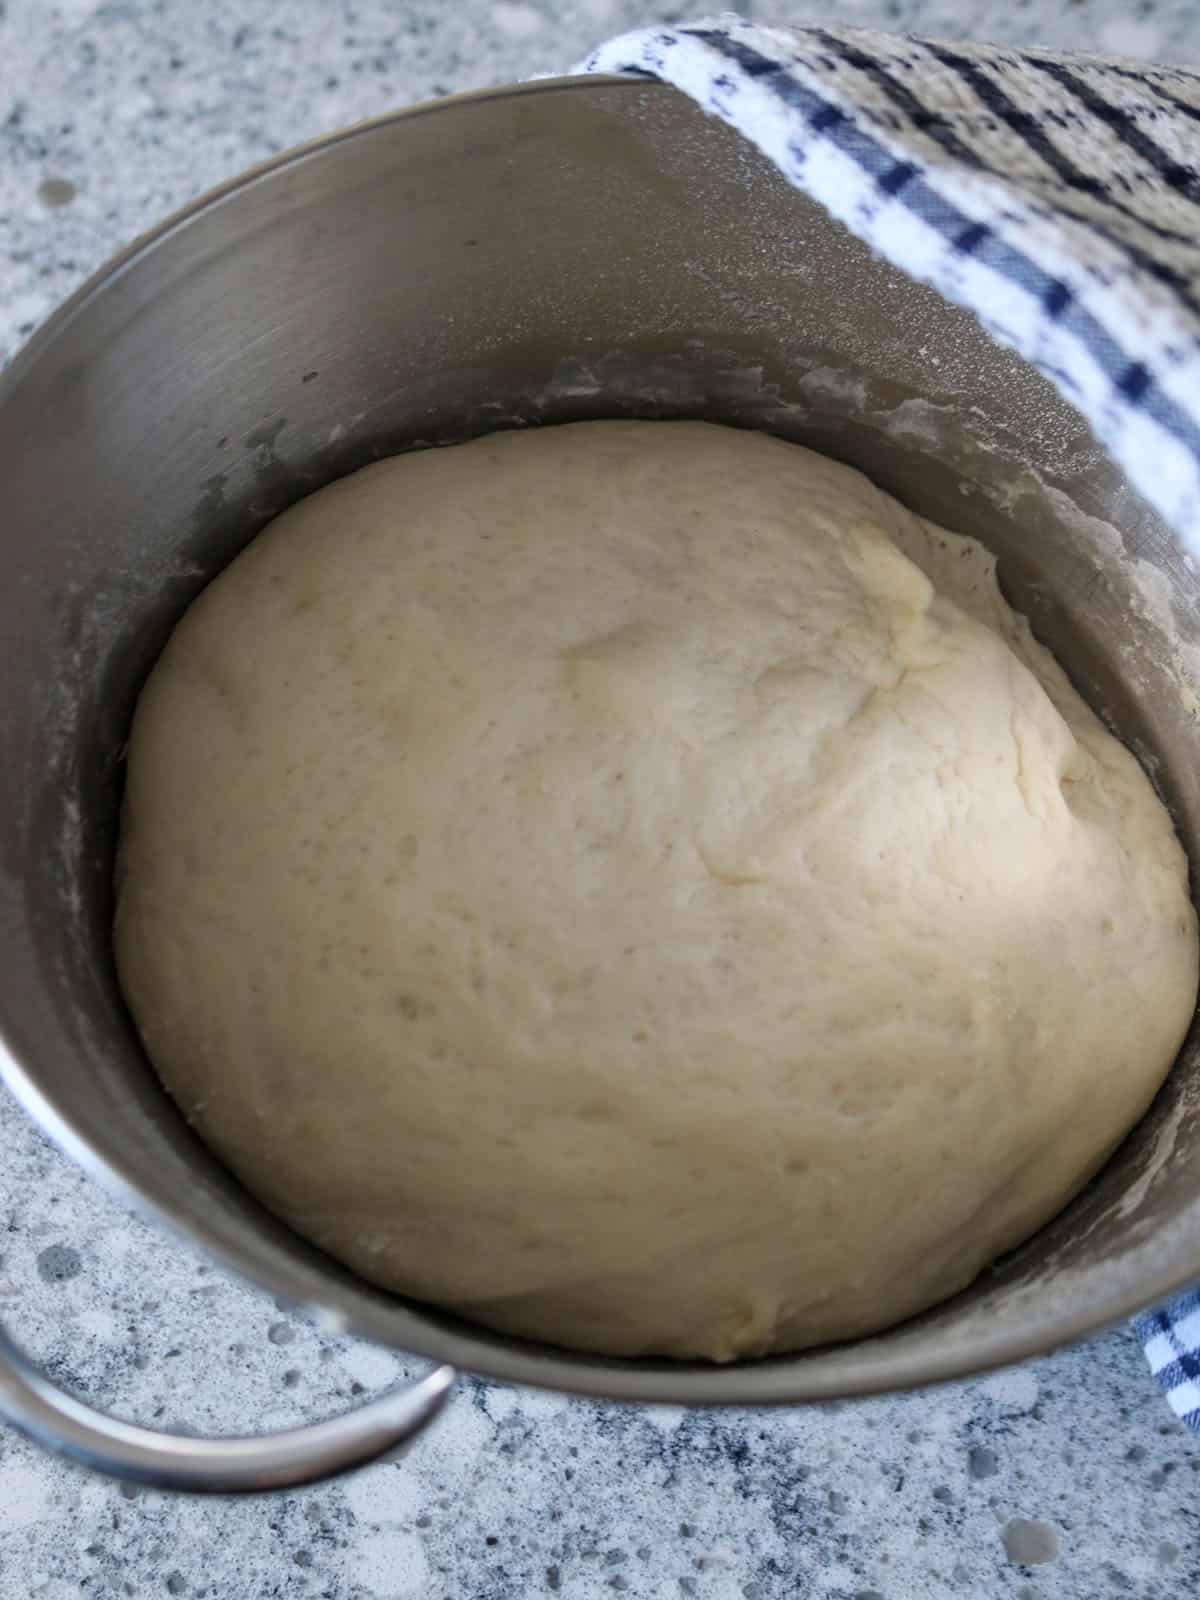 The pizza dough risen in the bowl.